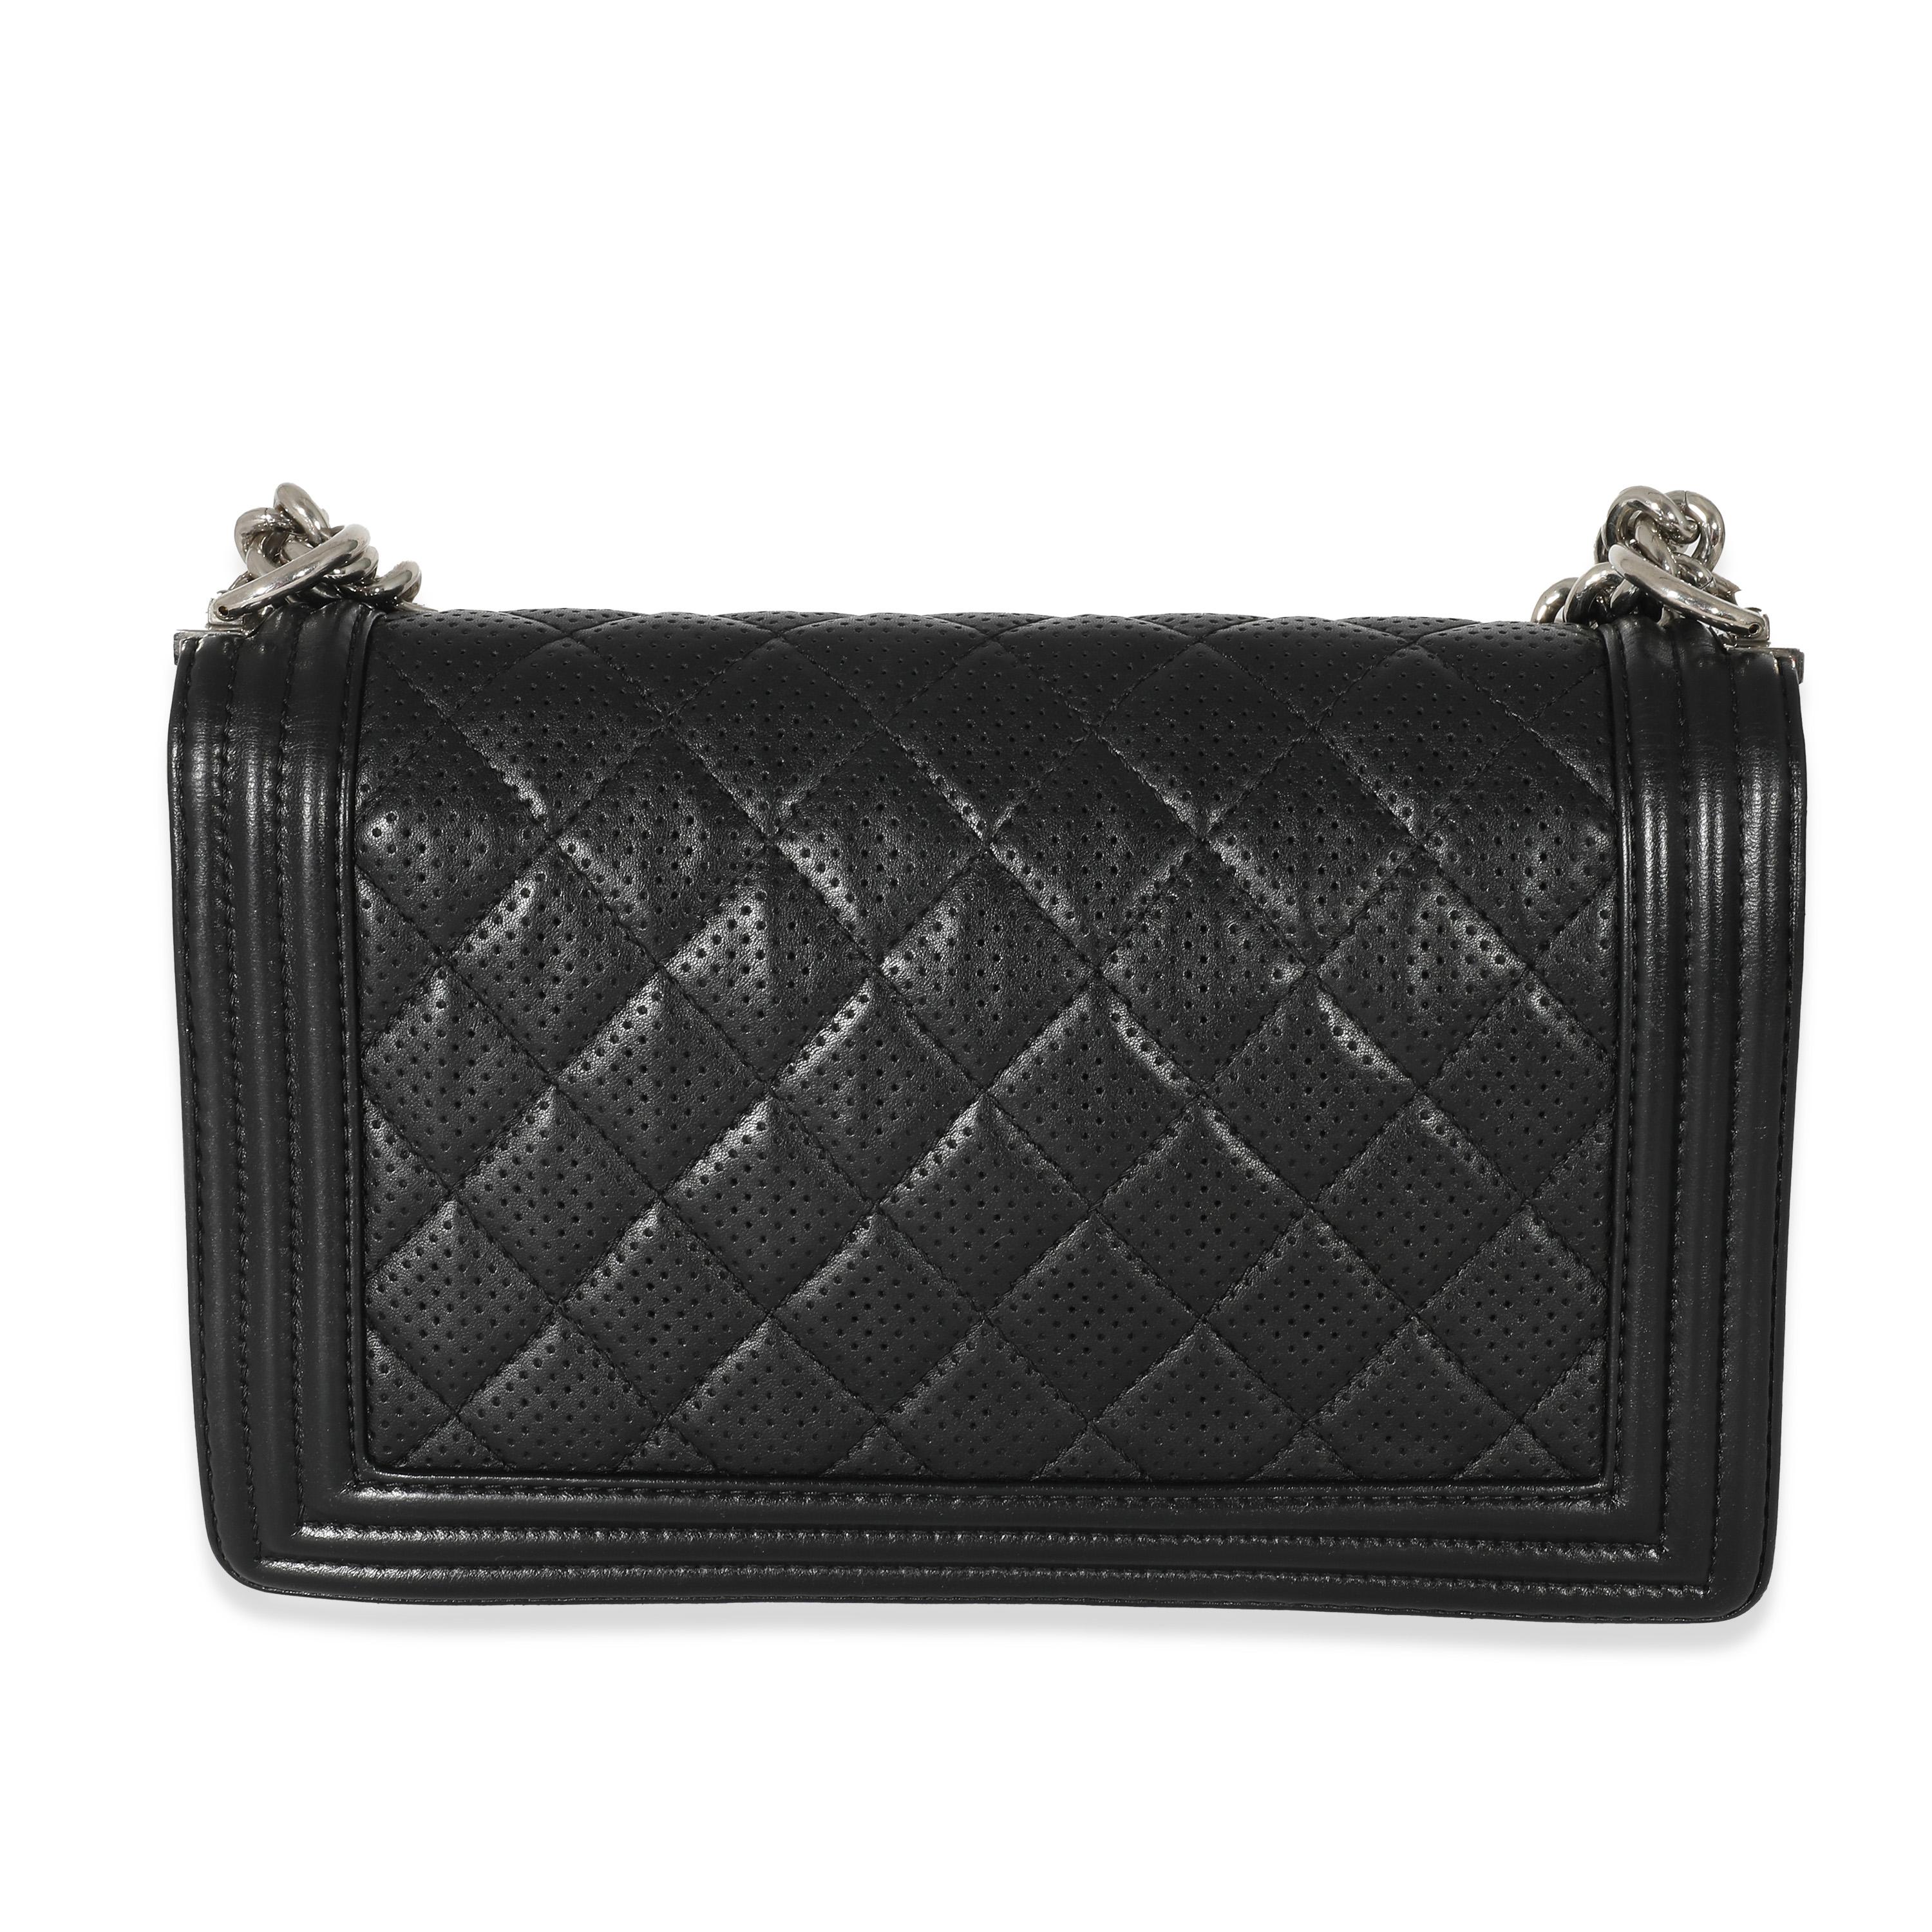 Listing Title: Chanel Black Perforated Lambskin New Medium Boy Bag
SKU: 133458
Condition: Pre-owned 
Condition Description: An instant classic, the Boy bag from Chanel was introduced in 2011. The quilted bag was designed by the late Karl Lagerfeld,